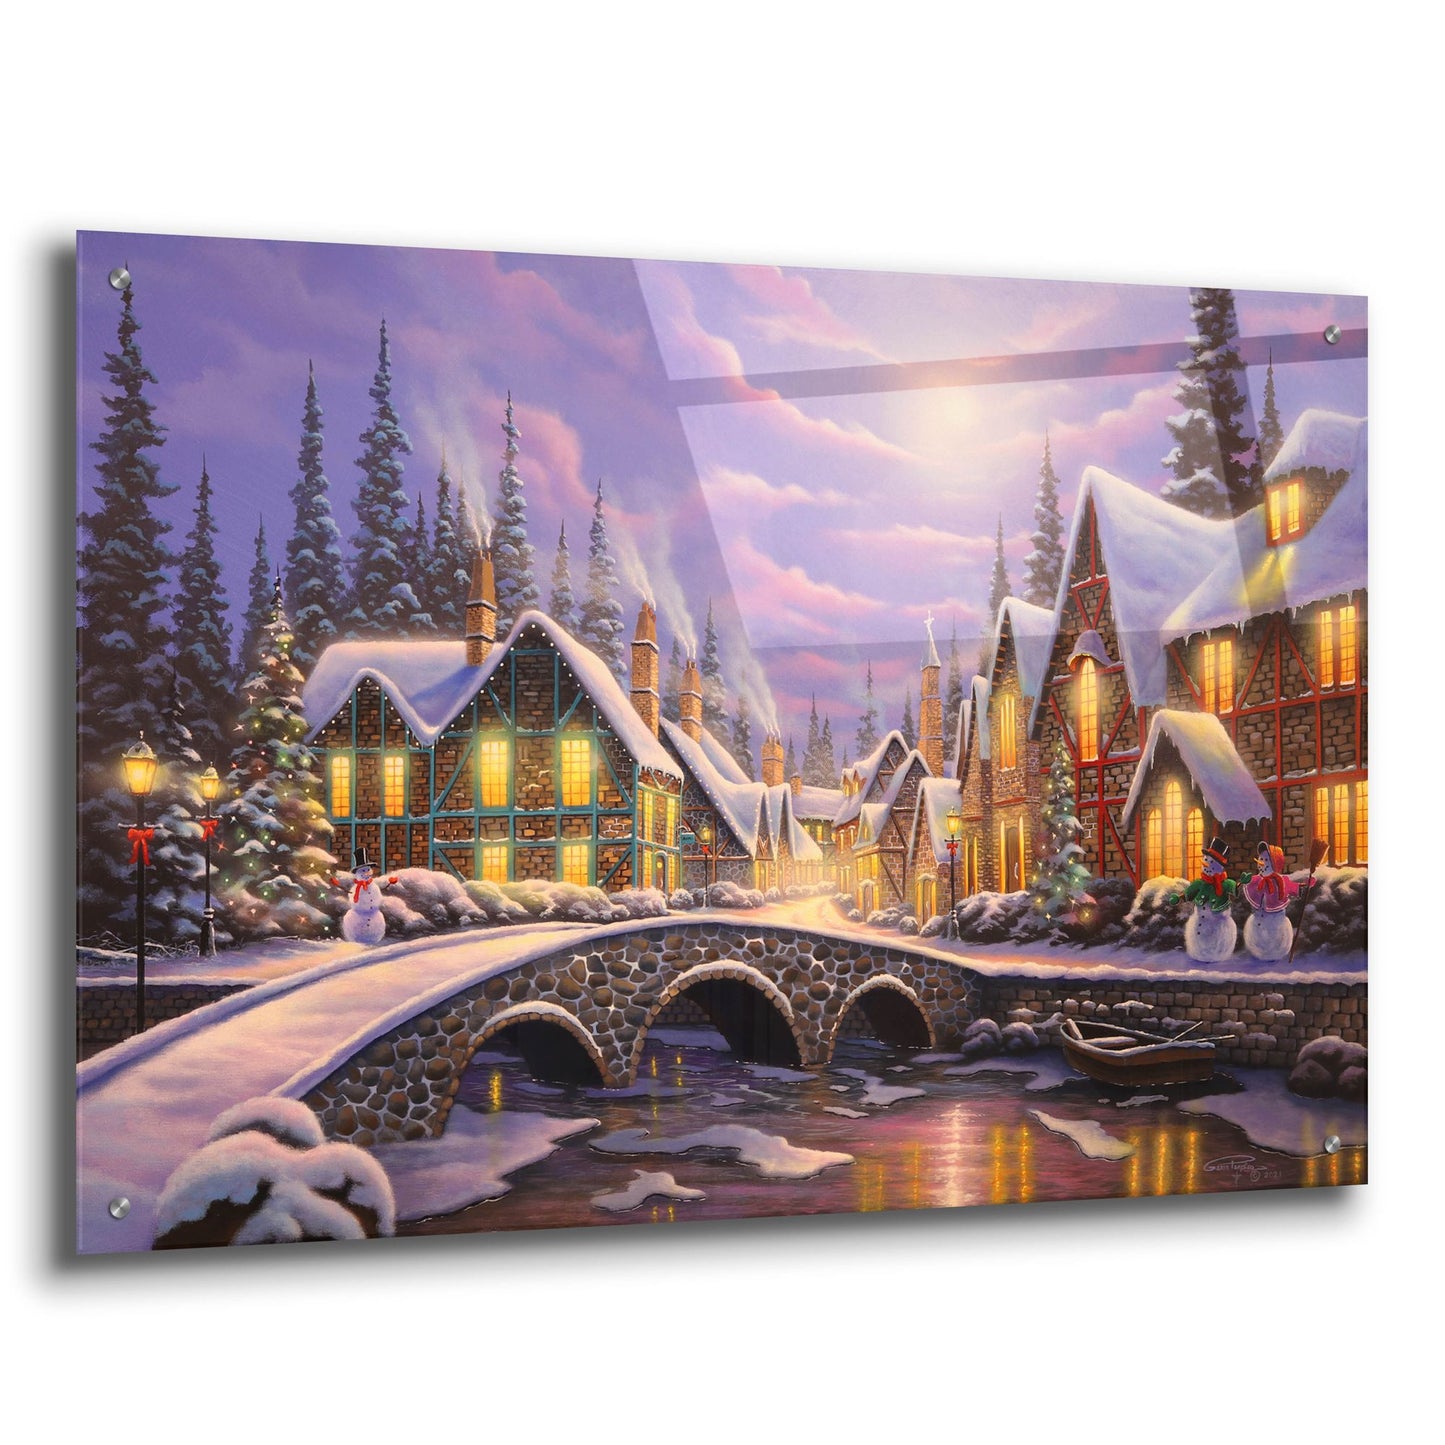 Epic Art 'A Snowy Christmas' by Geno Peoples, Acrylic Glass Wall Art,36x24